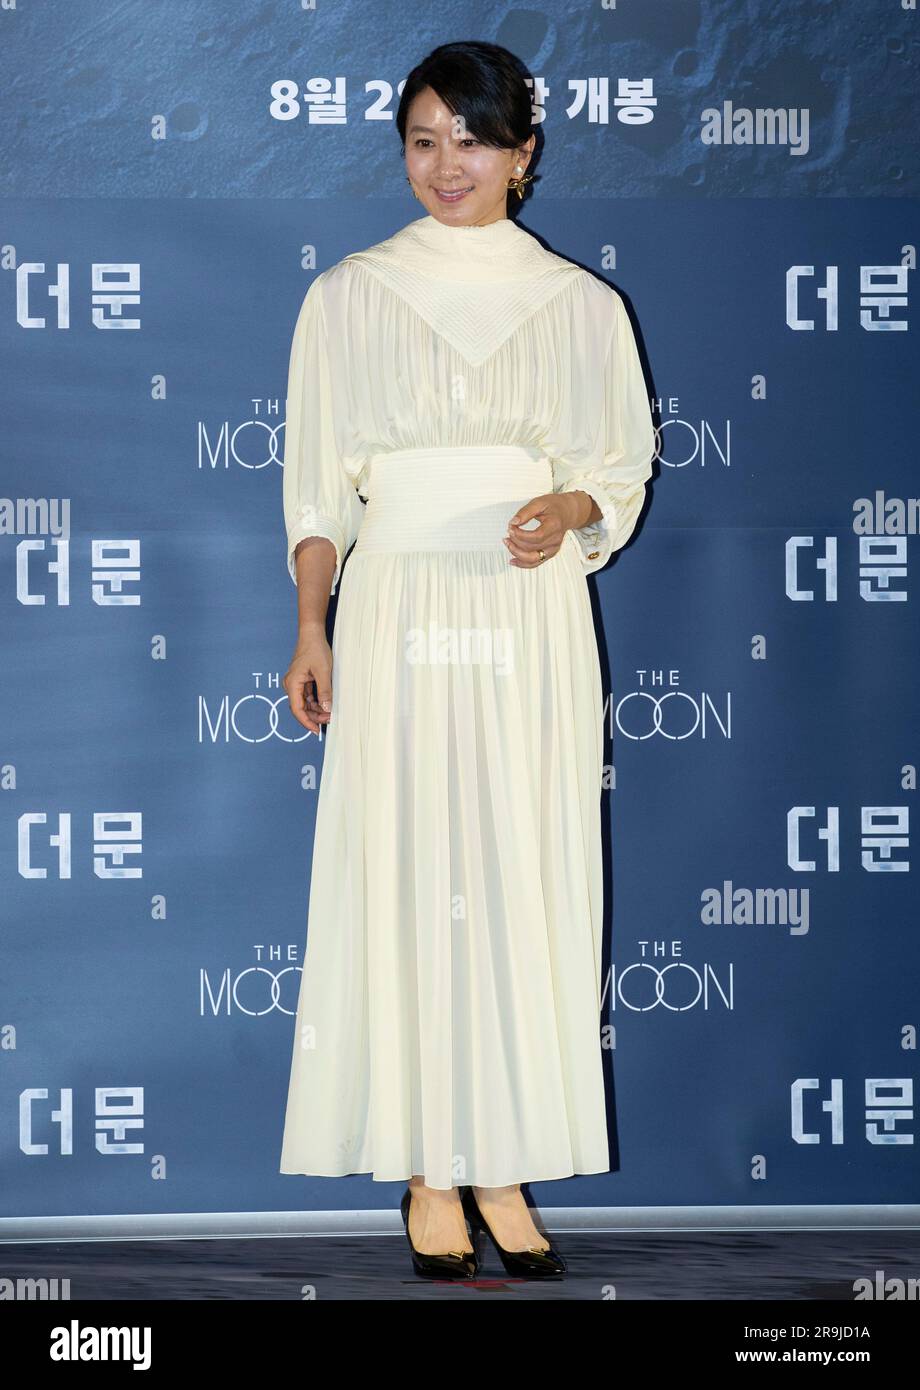 Seoul, South Korea. 27th June, 2023. South Korean actress Kim Hee-ae, photocall for the film ‘The Moon' press conference in Seoul, South Korea on Jun 27, 2023. The film will open on August 2. (Photo by Lee Young-ho/Sipa USA) Credit: Sipa USA/Alamy Live News Stock Photo